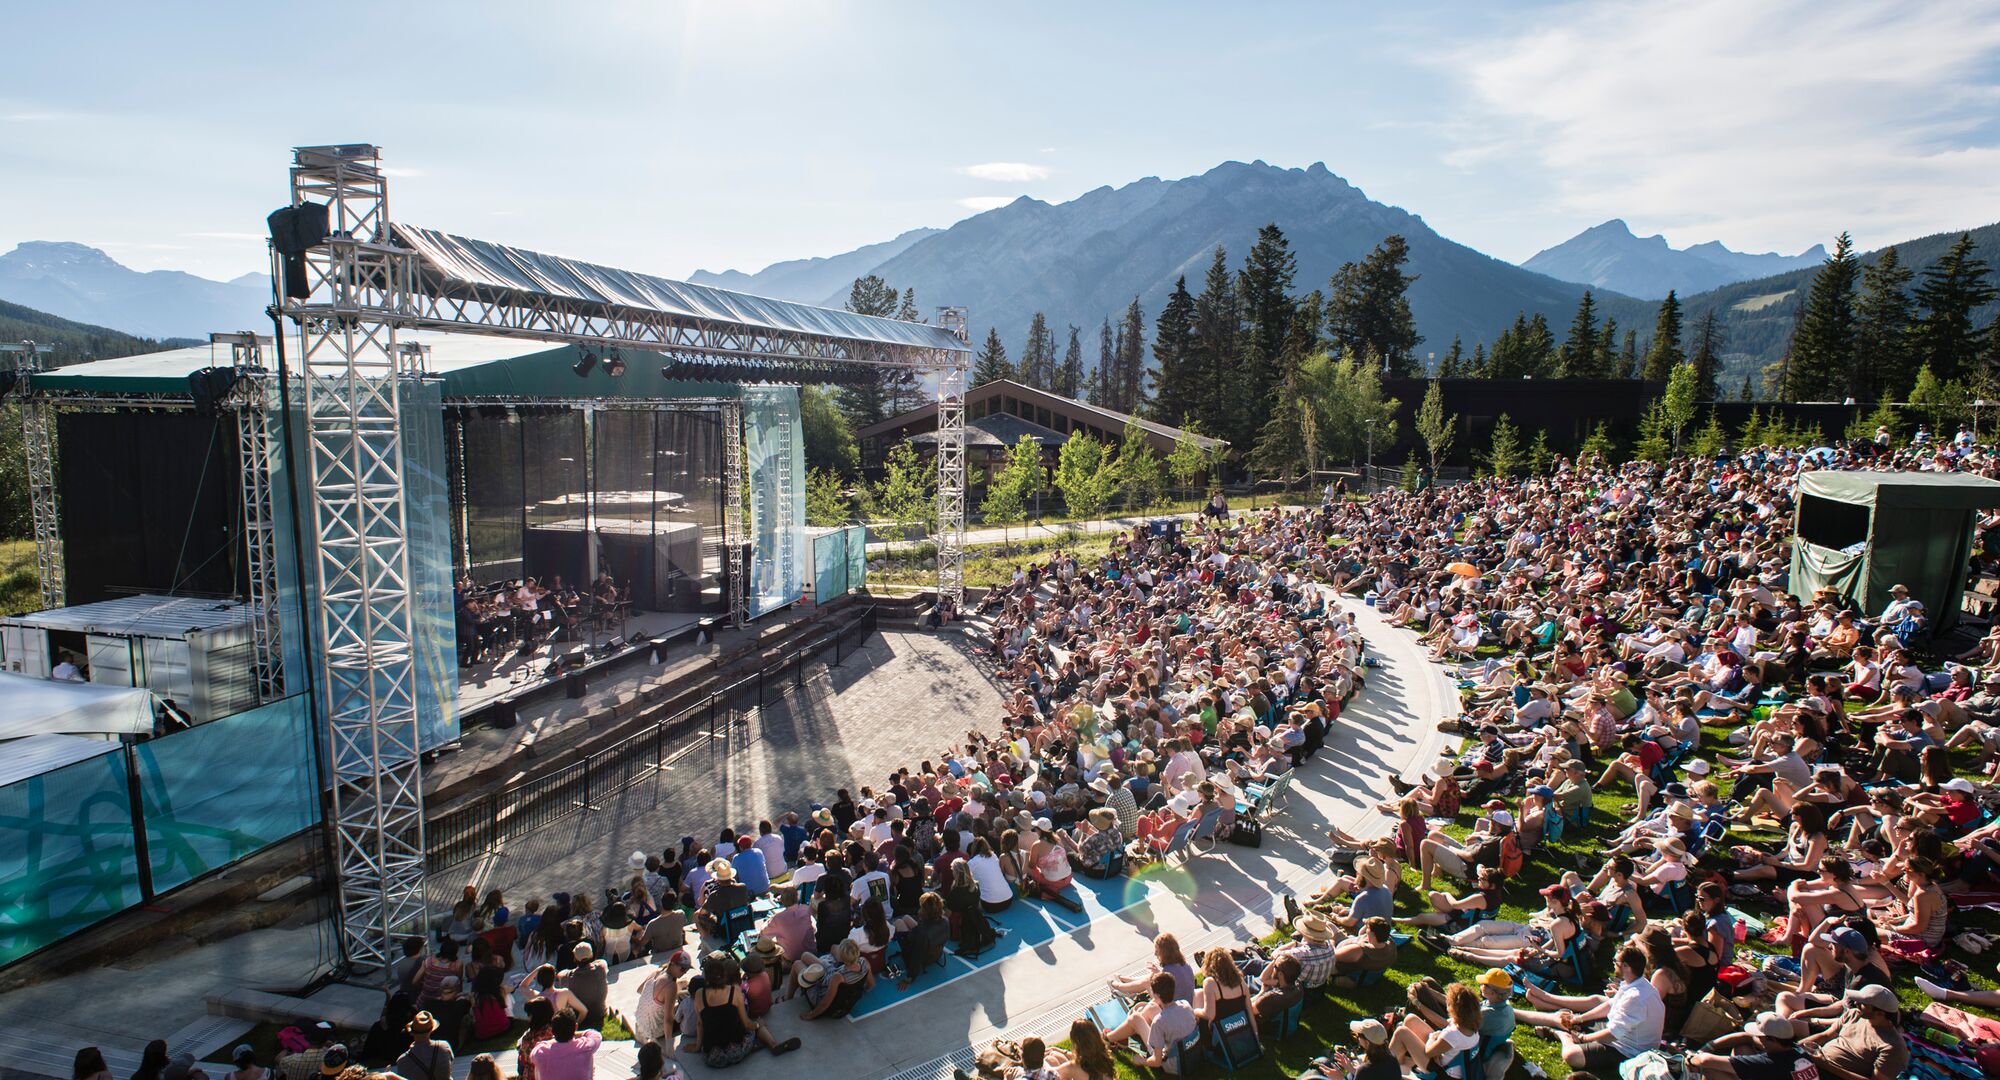 A large crowd is seated in a semicircle around an outdoor stage while watching a performance on a sunny day at the Banff Centre